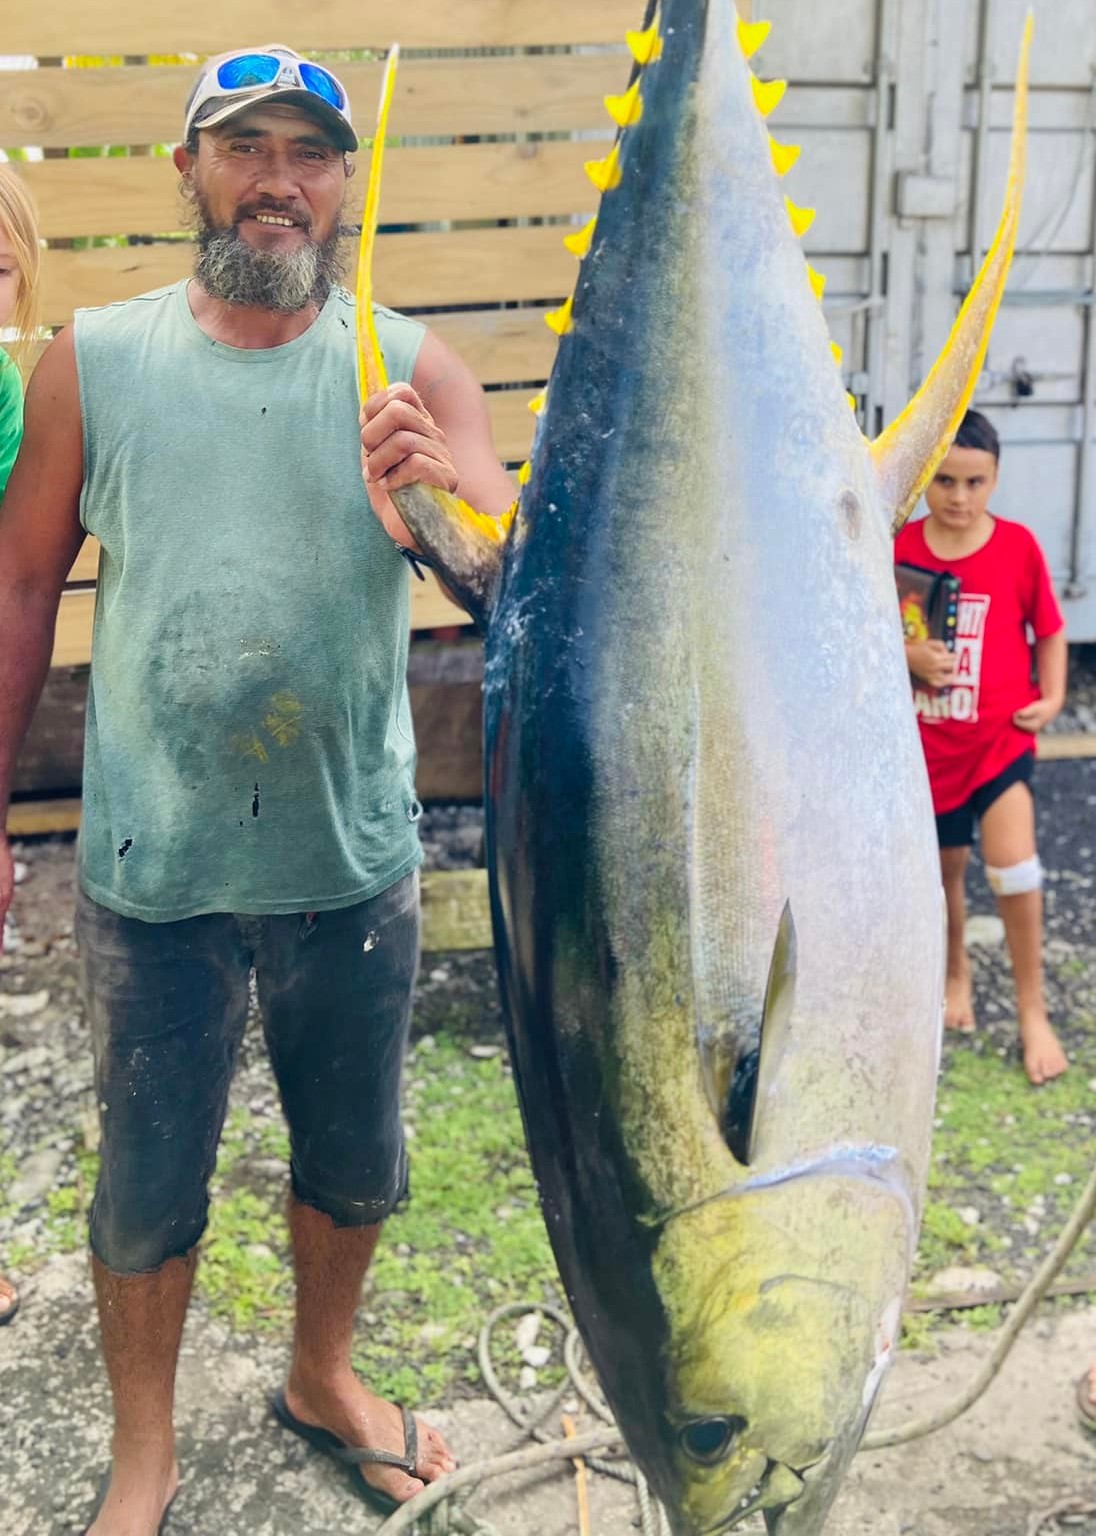 Local resident wins $1000 for whopping 70kg yellowfin